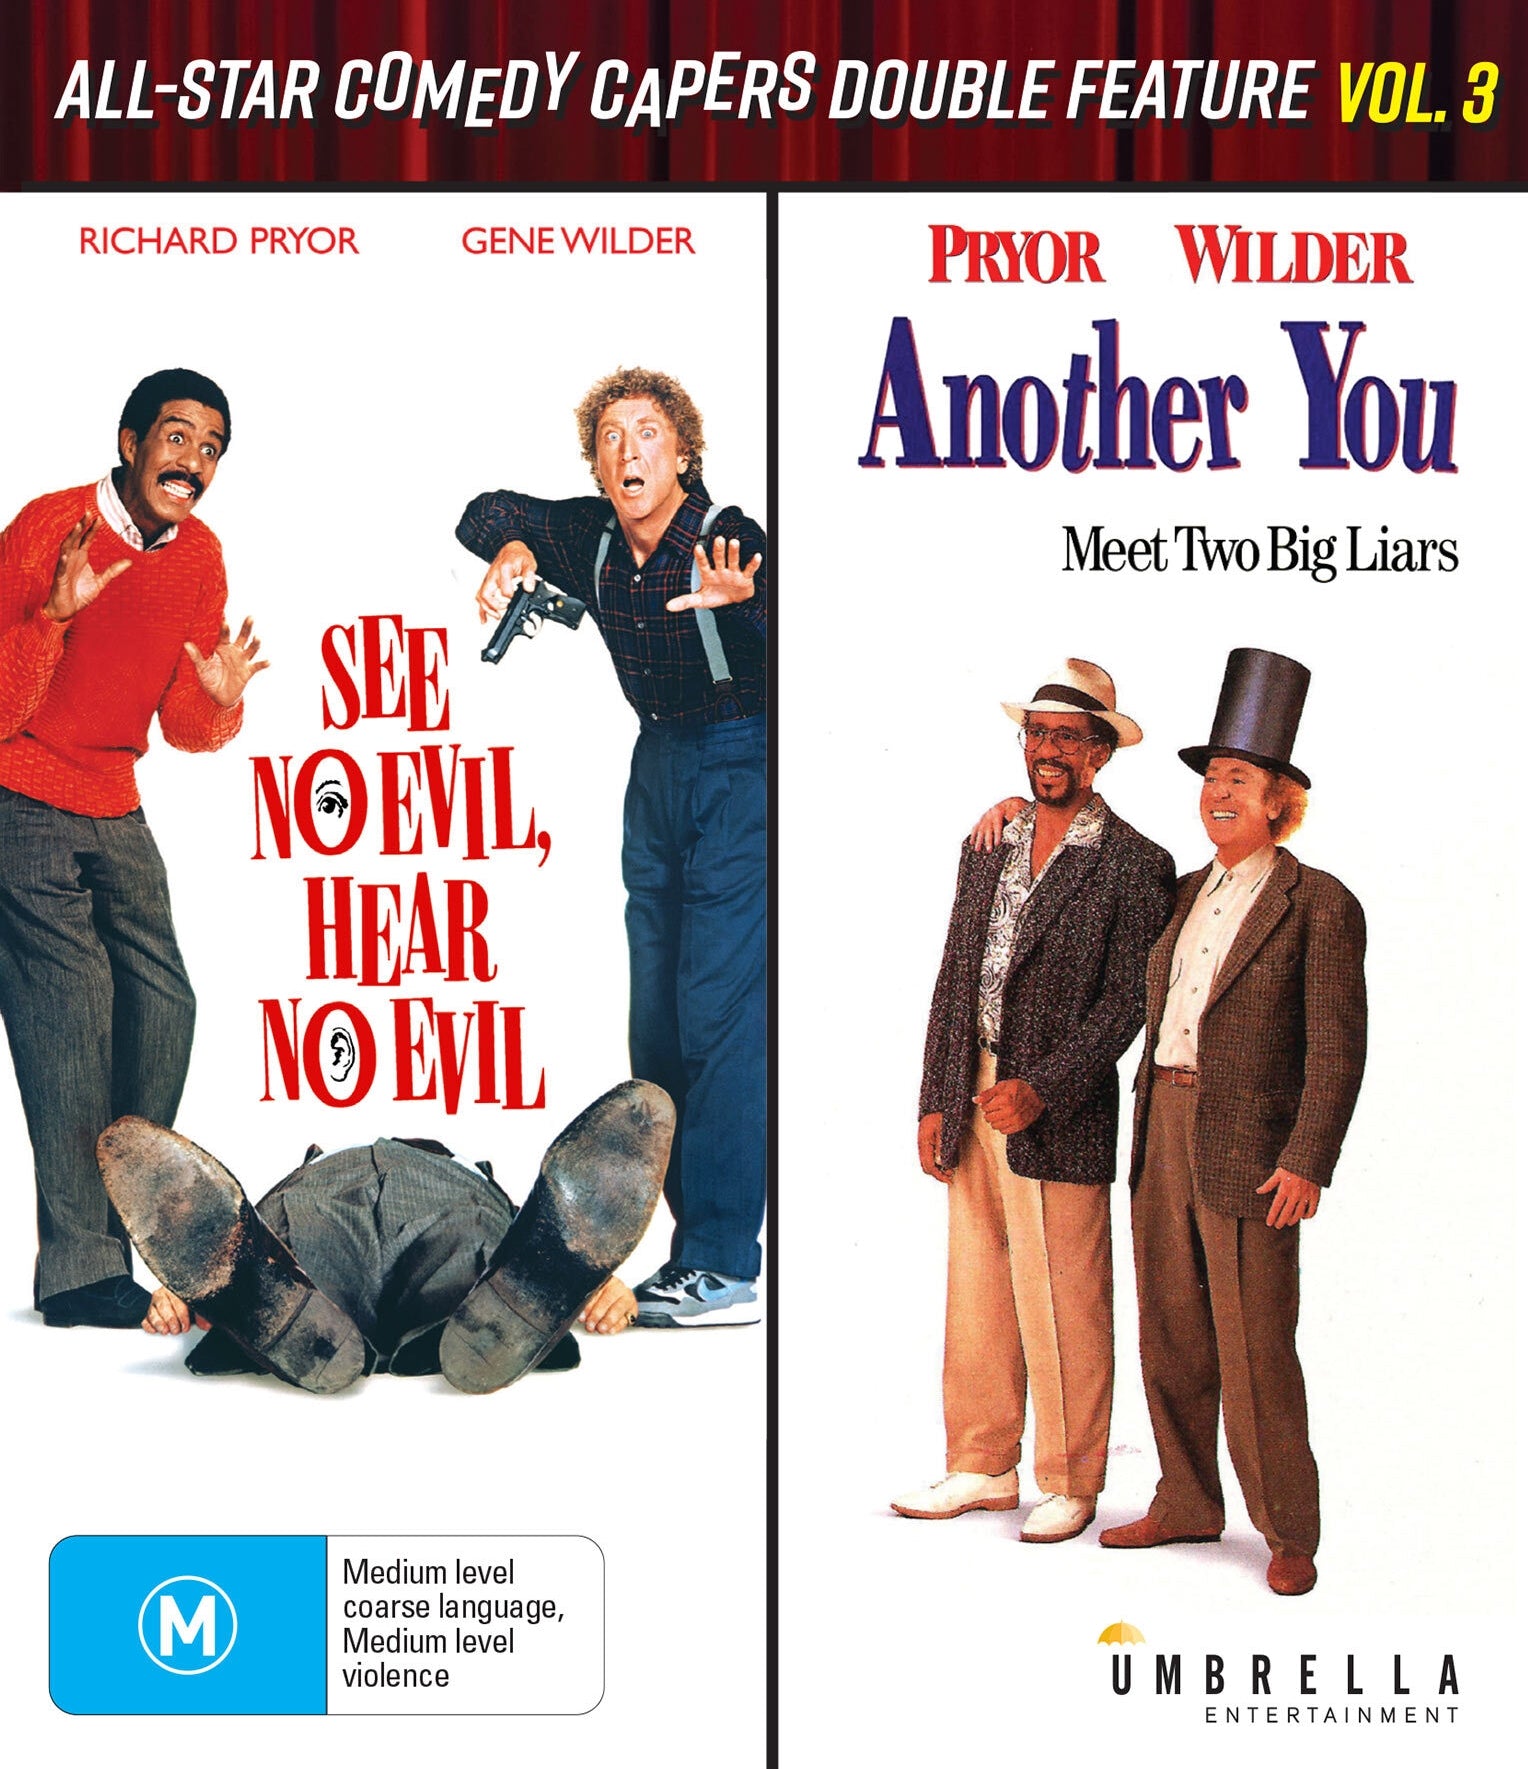 ALL-STAR COMEDY CAPERS DOUBLE FEATURE VOLUME 3 (REGION FREE IMPORT) BLU-RAY